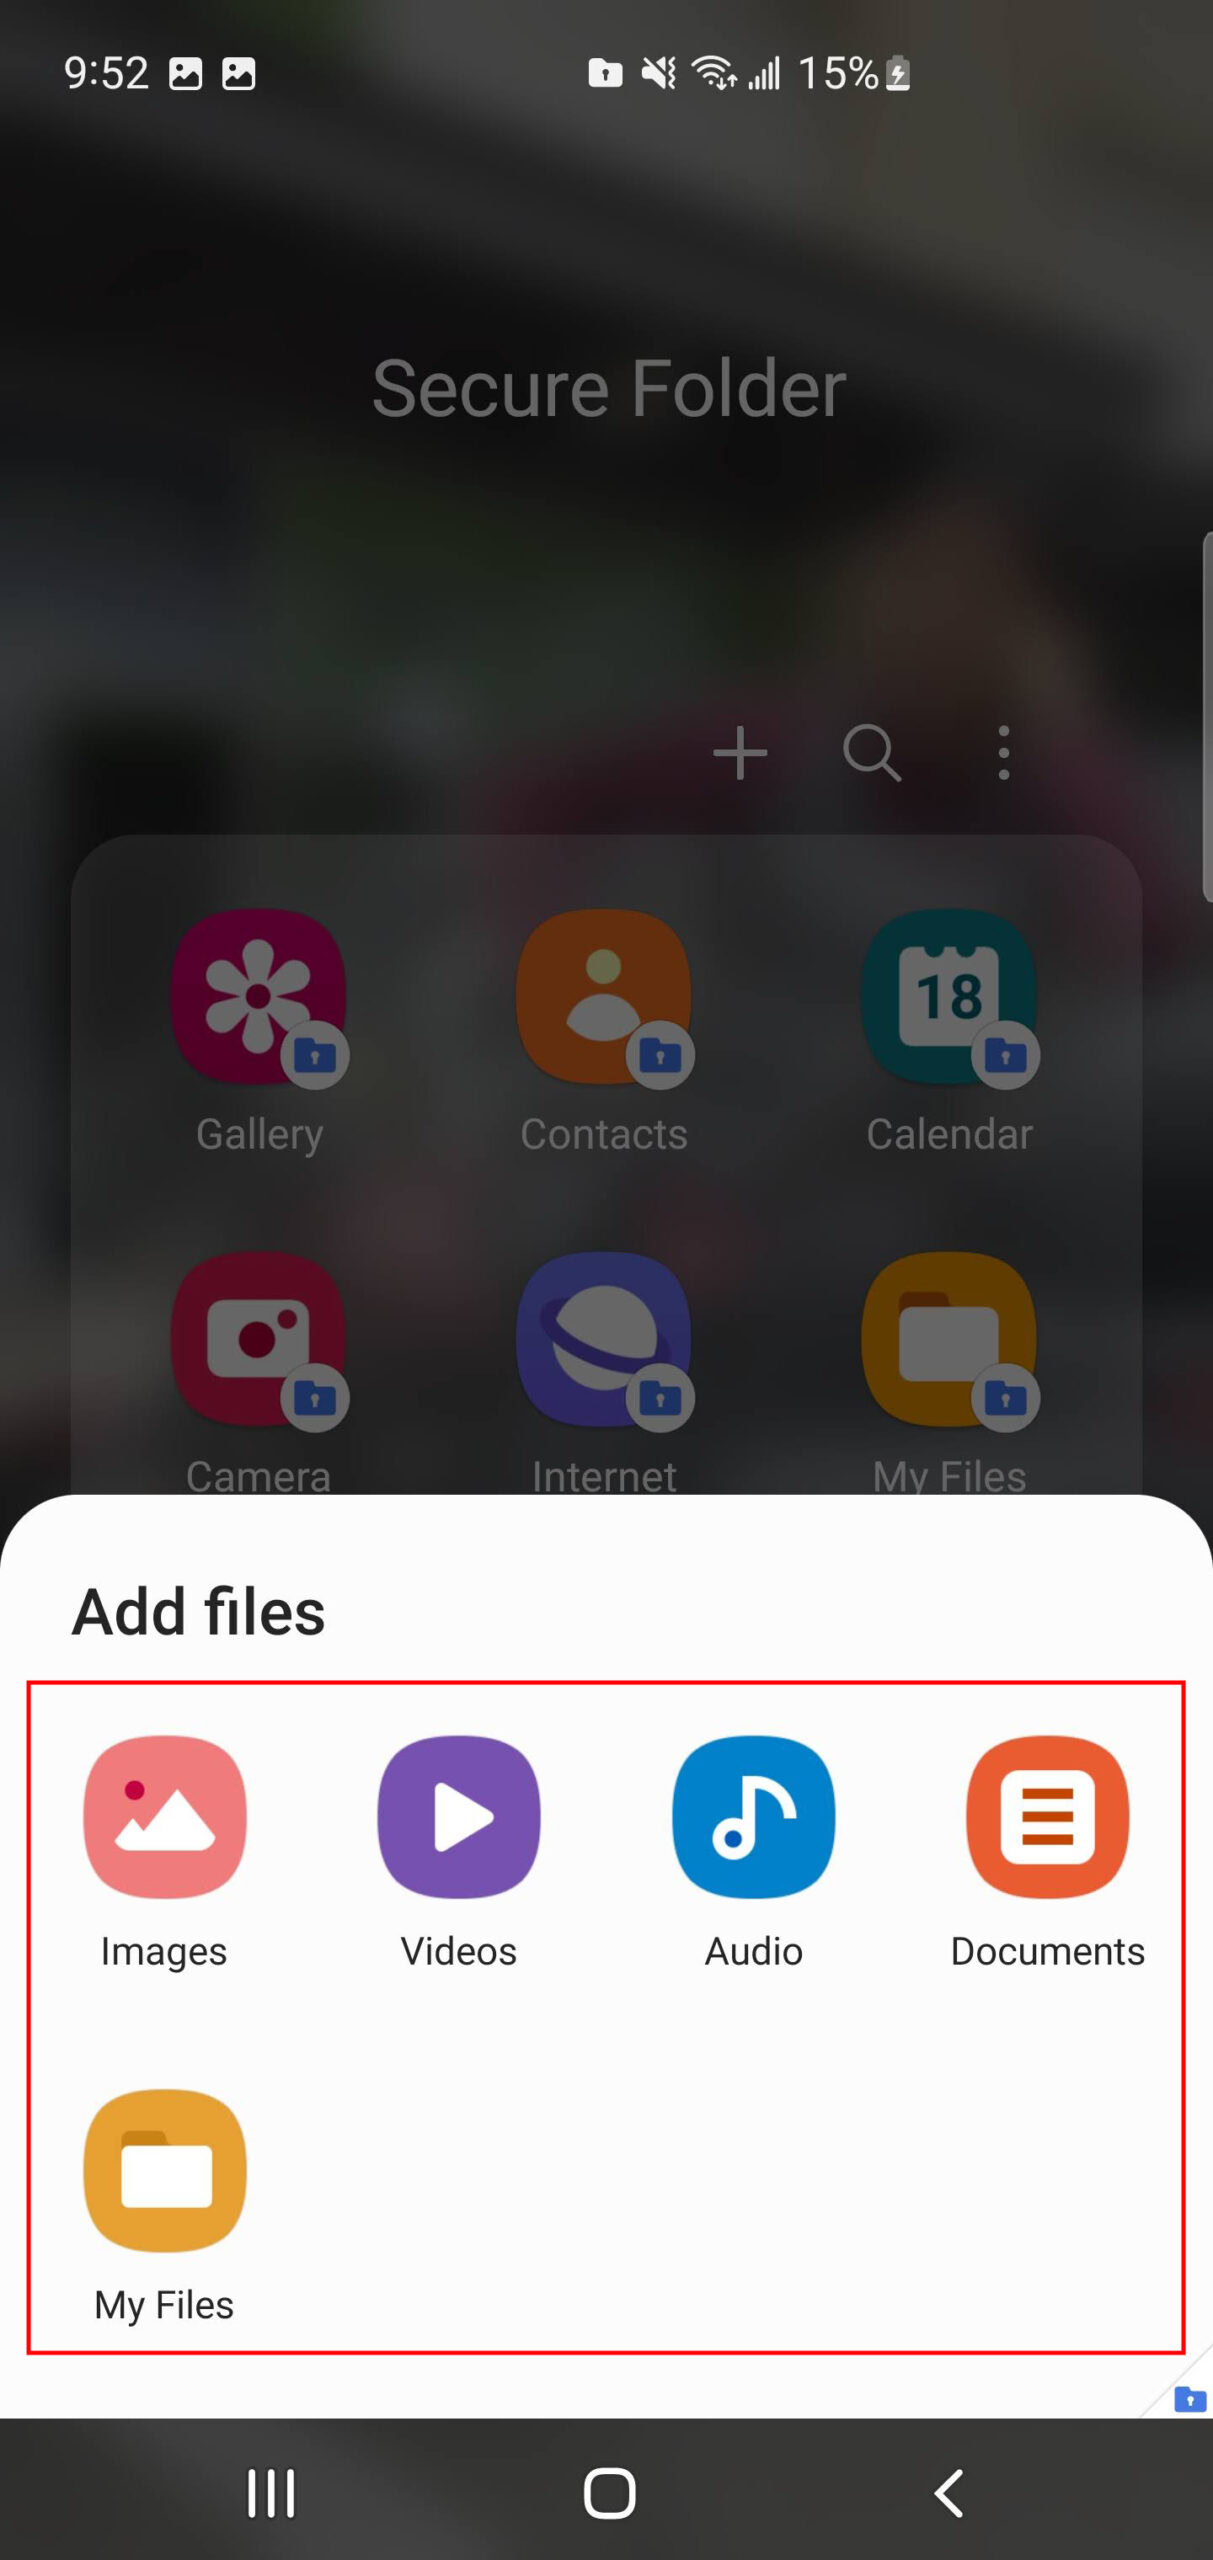 How to add files to Samsung Secure Folder using the app (4)